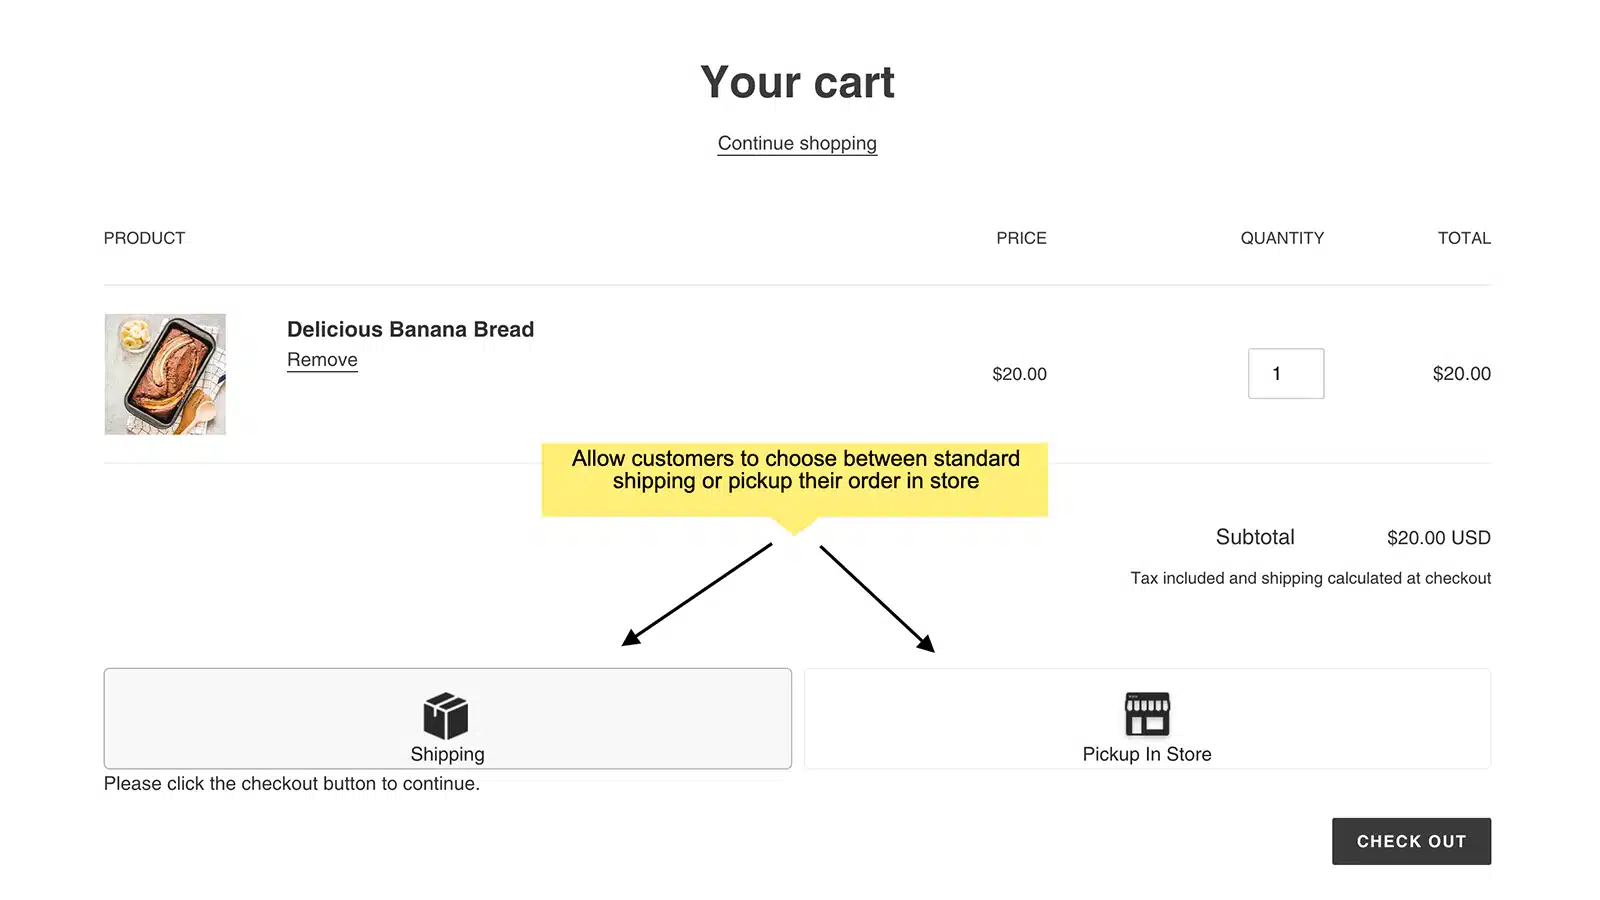 store-pickup-delivery-cr-app-your-cart